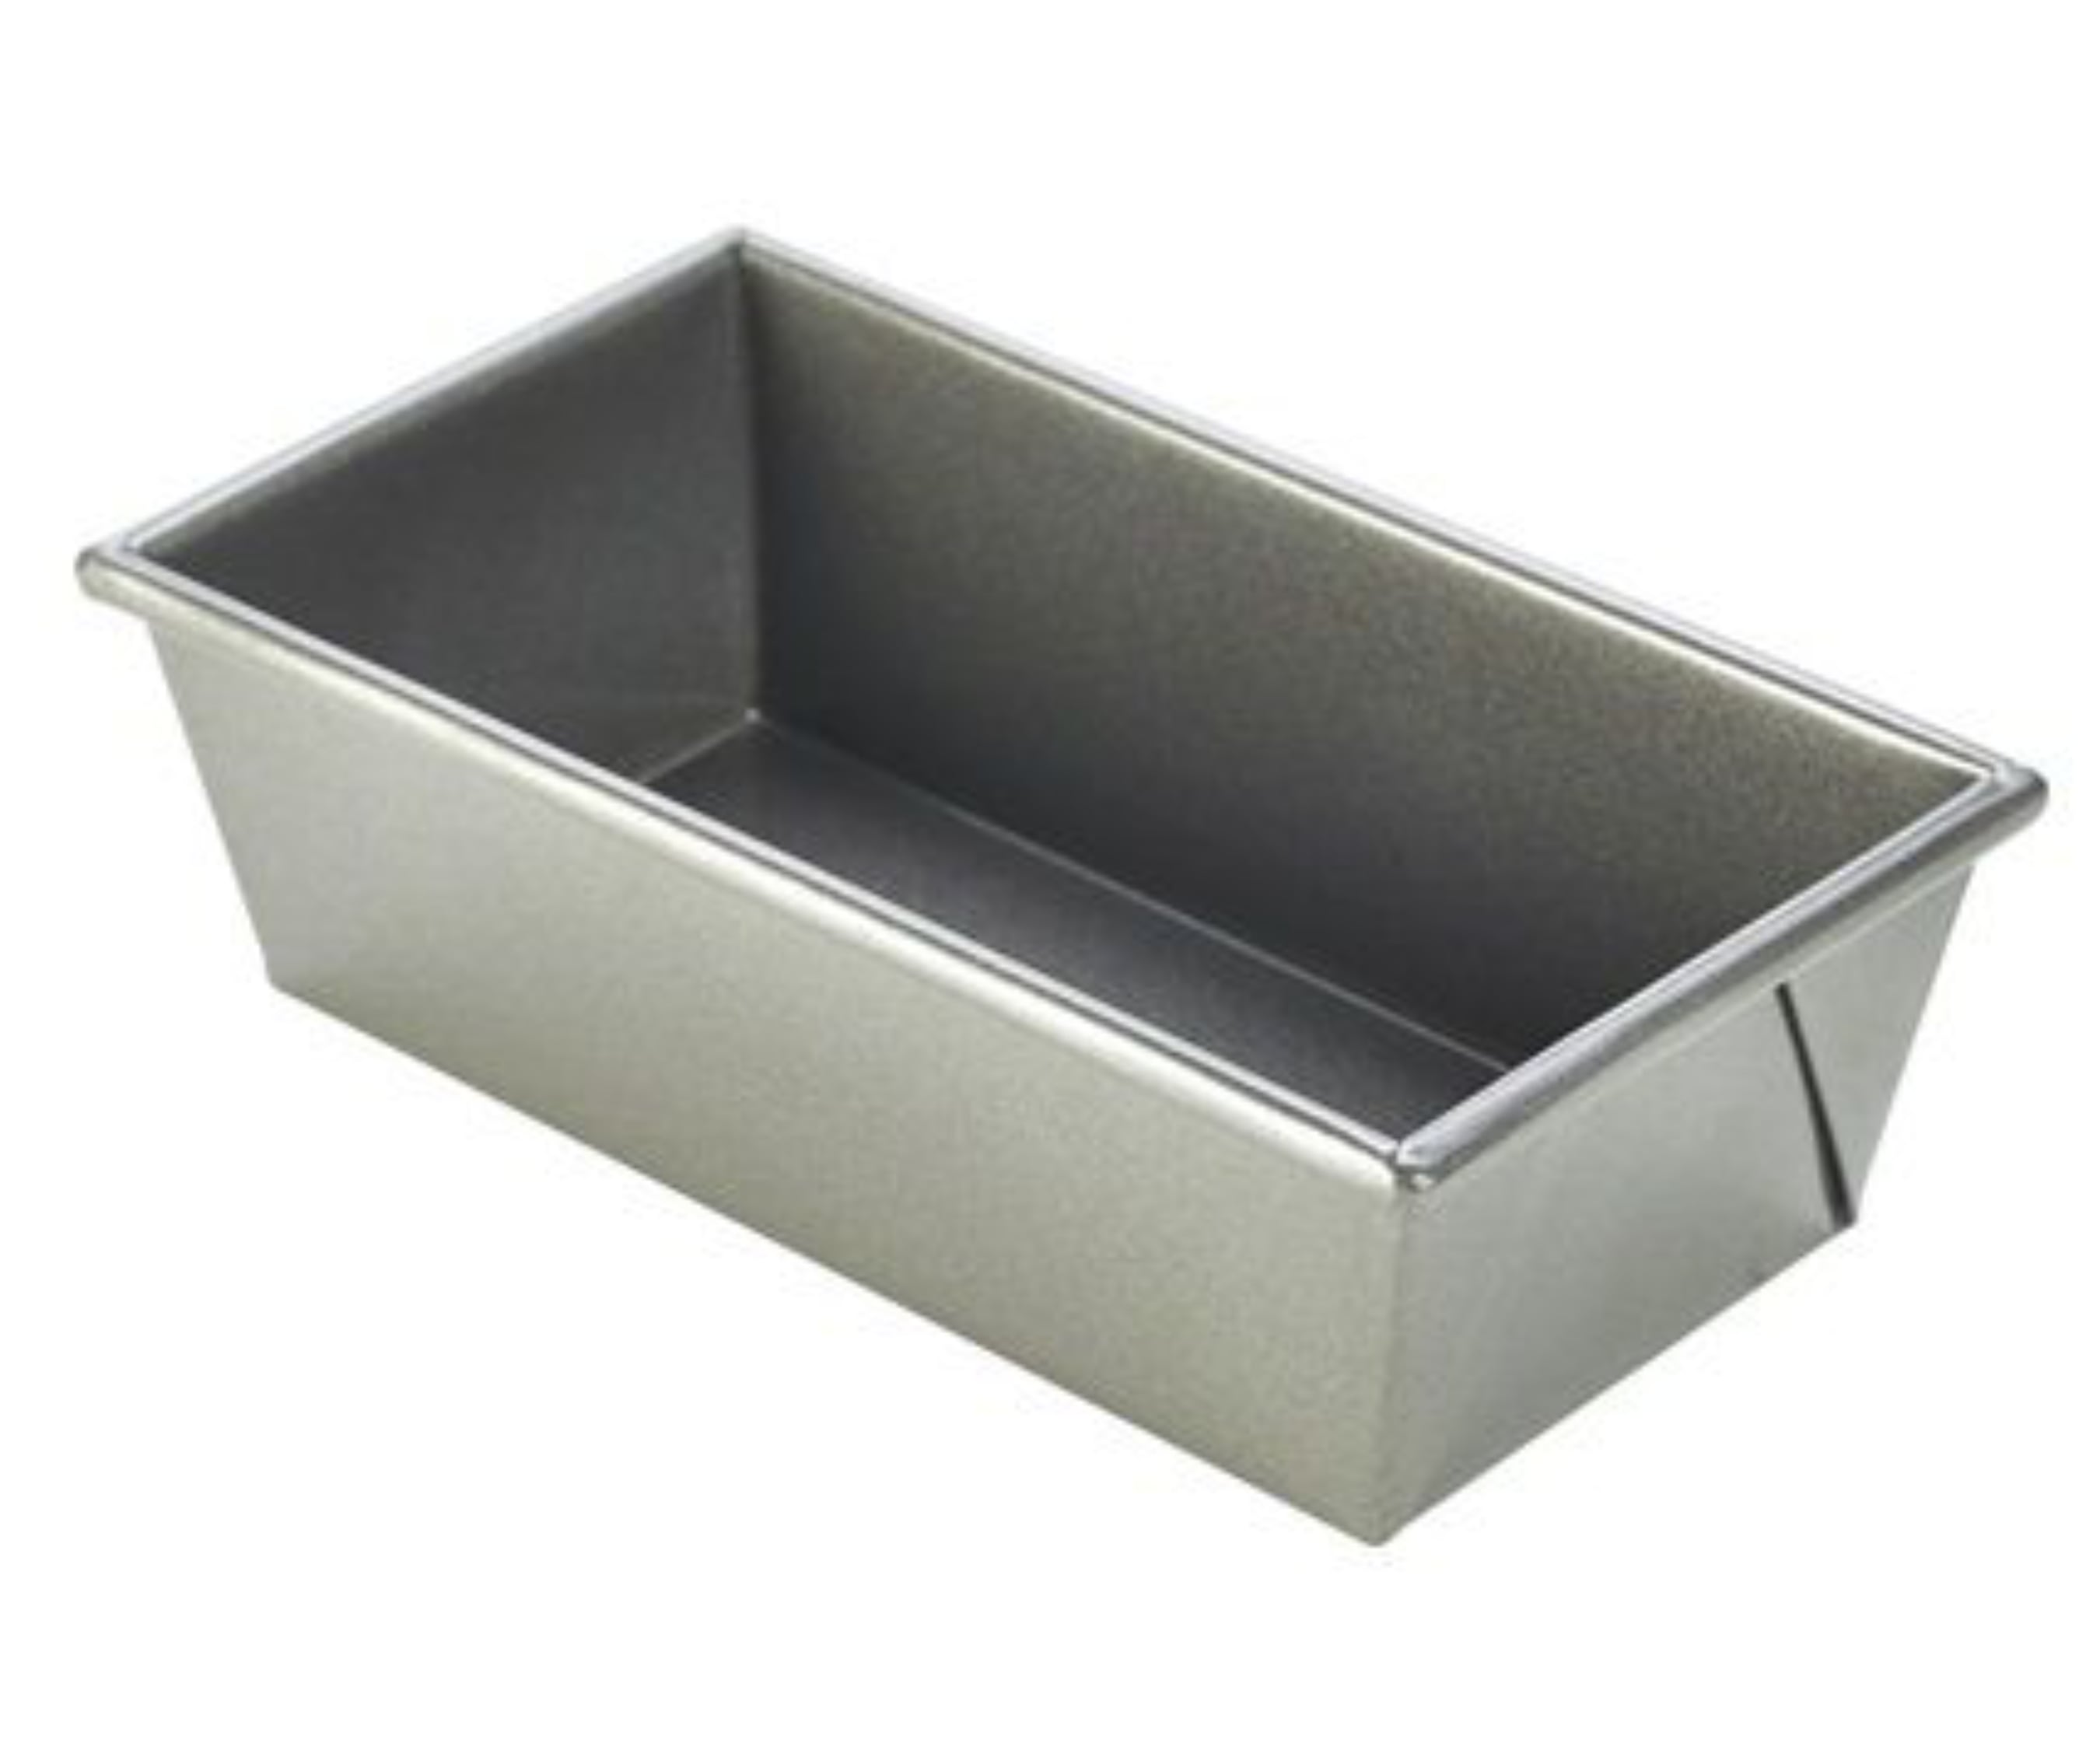 Genware Carbon Steel Non-Stick Traditional Loaf Pan 24 x 12.5cm